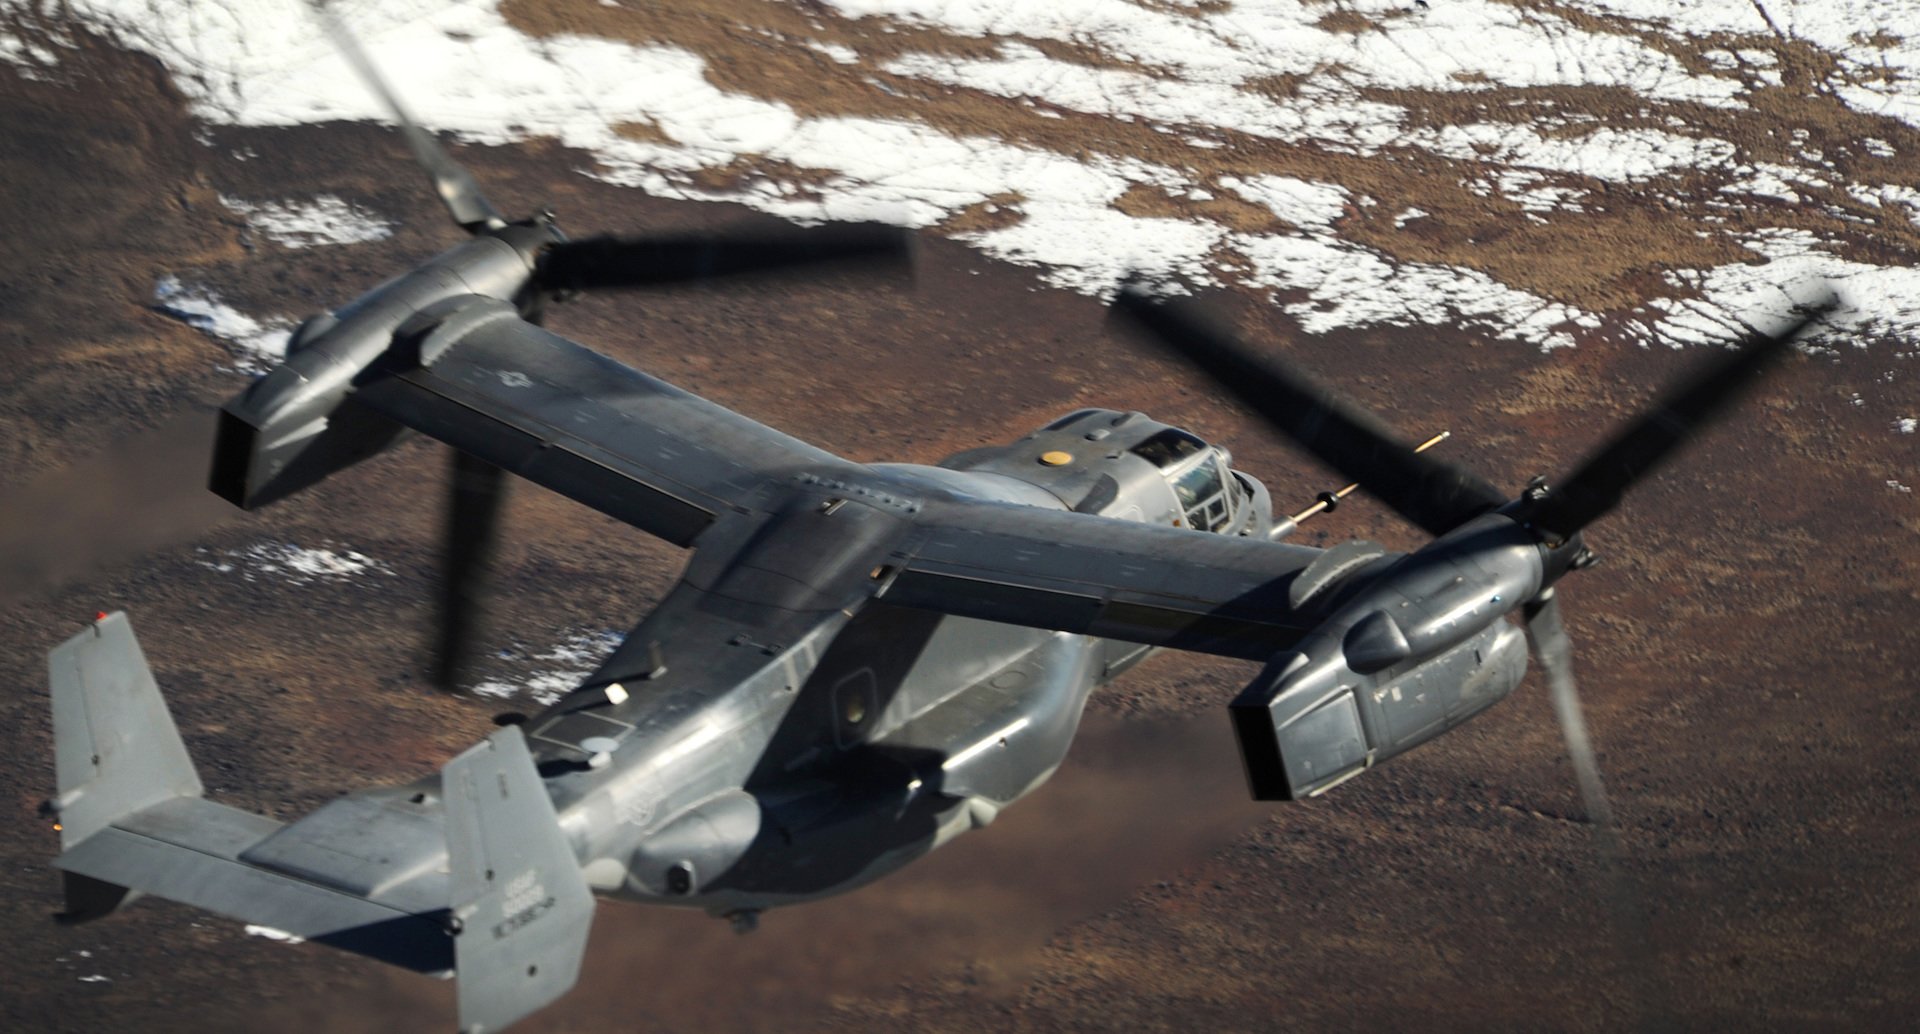 A 71st Operations Squadron CV-22 Osprey, Jan. 4, 2012. US Air Force photo by Senior Airman James Bell.